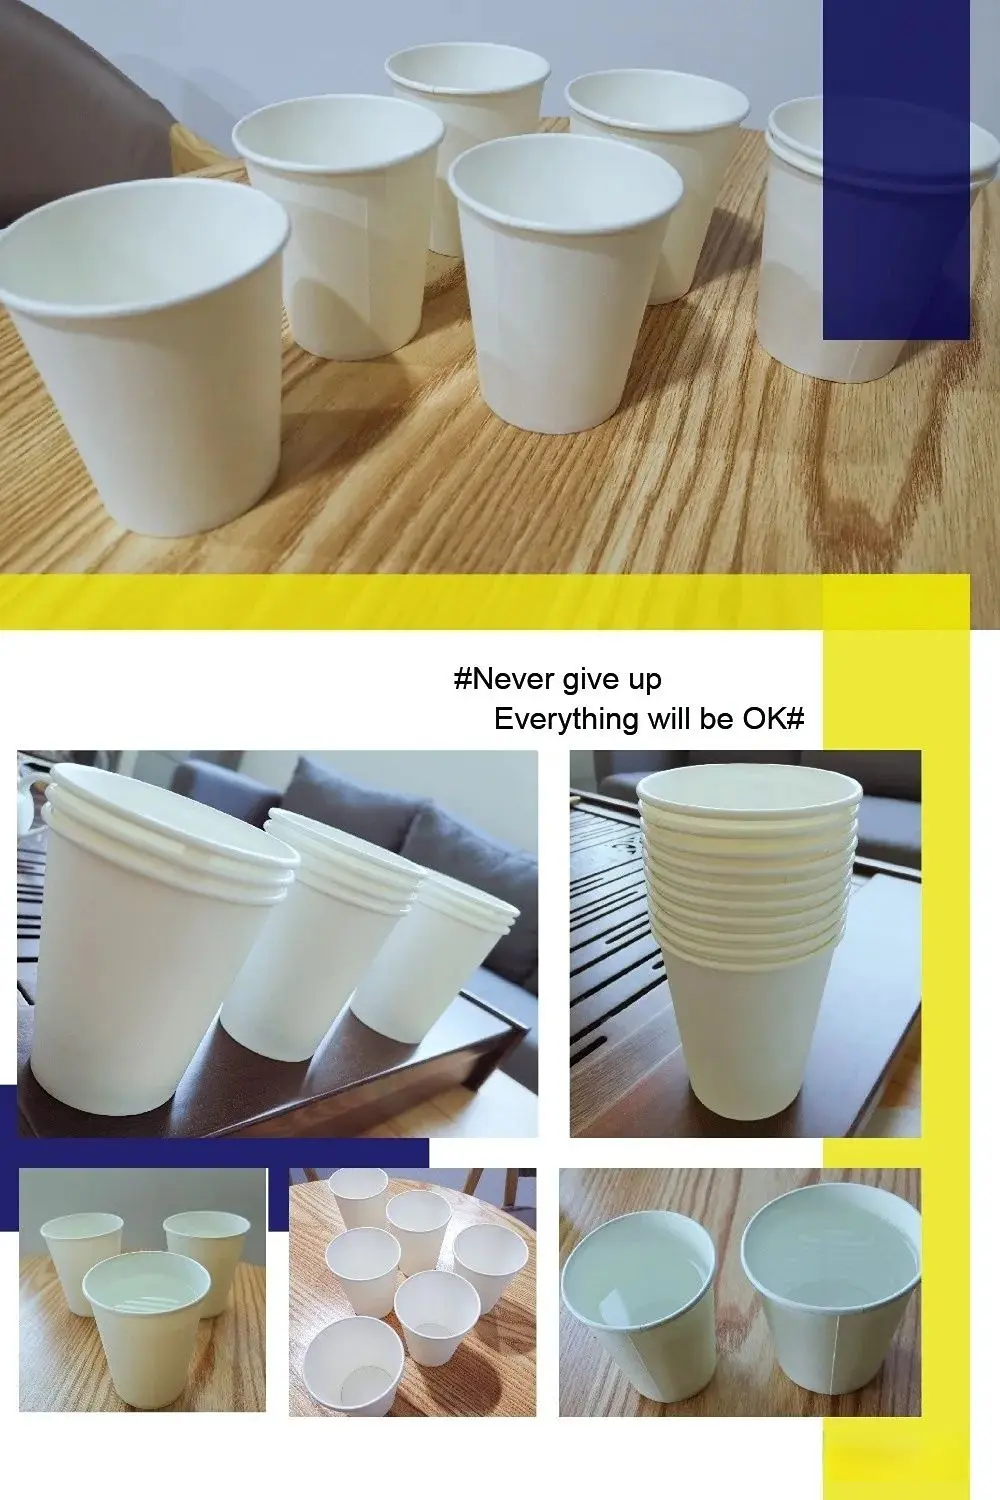 Comparison of plastic-coated and eco-friendly paper cups in soil